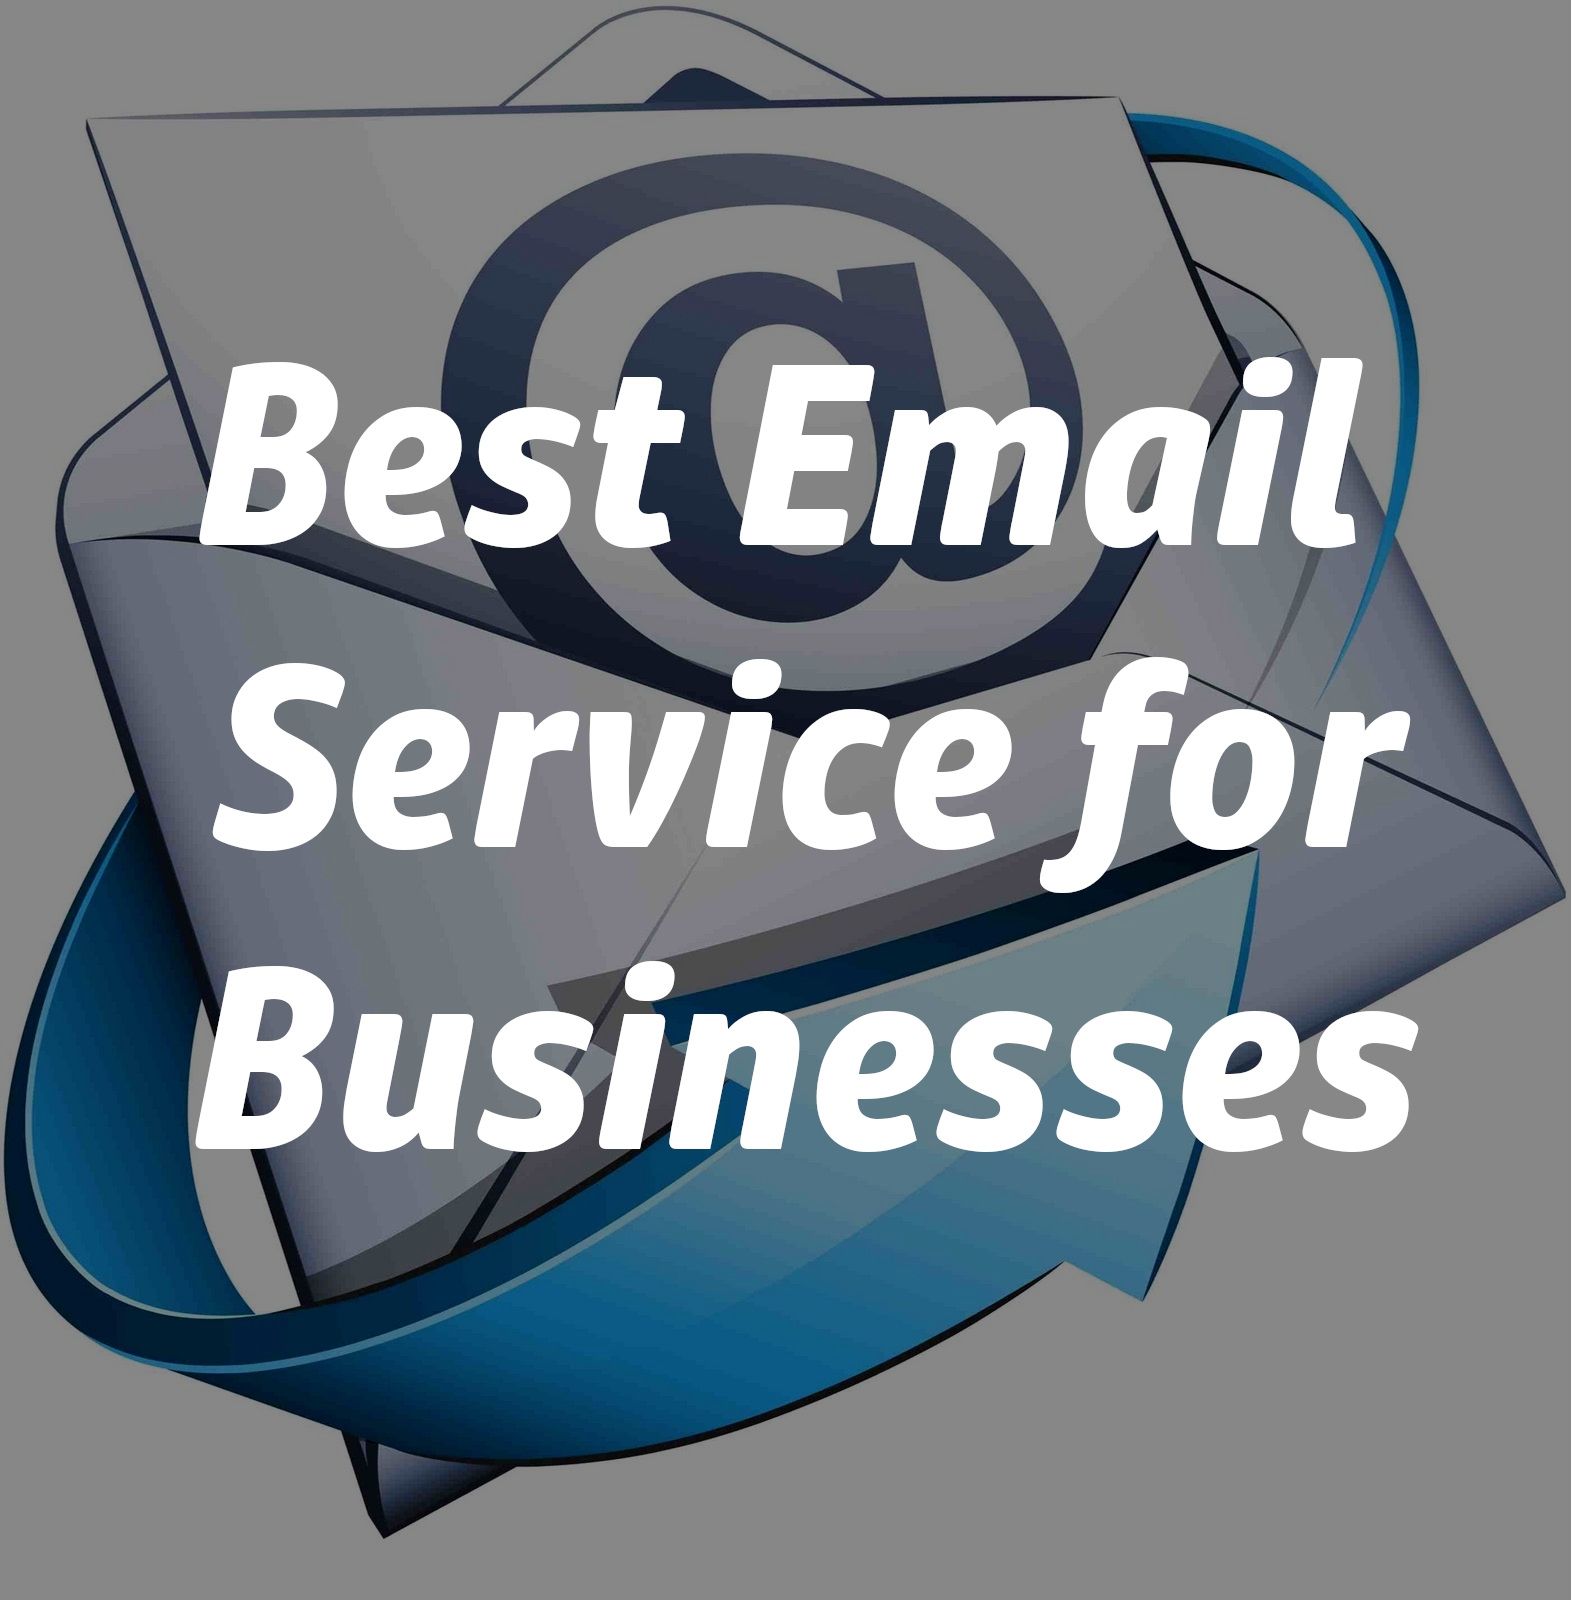 Choosing the Best Email Service for Your Business